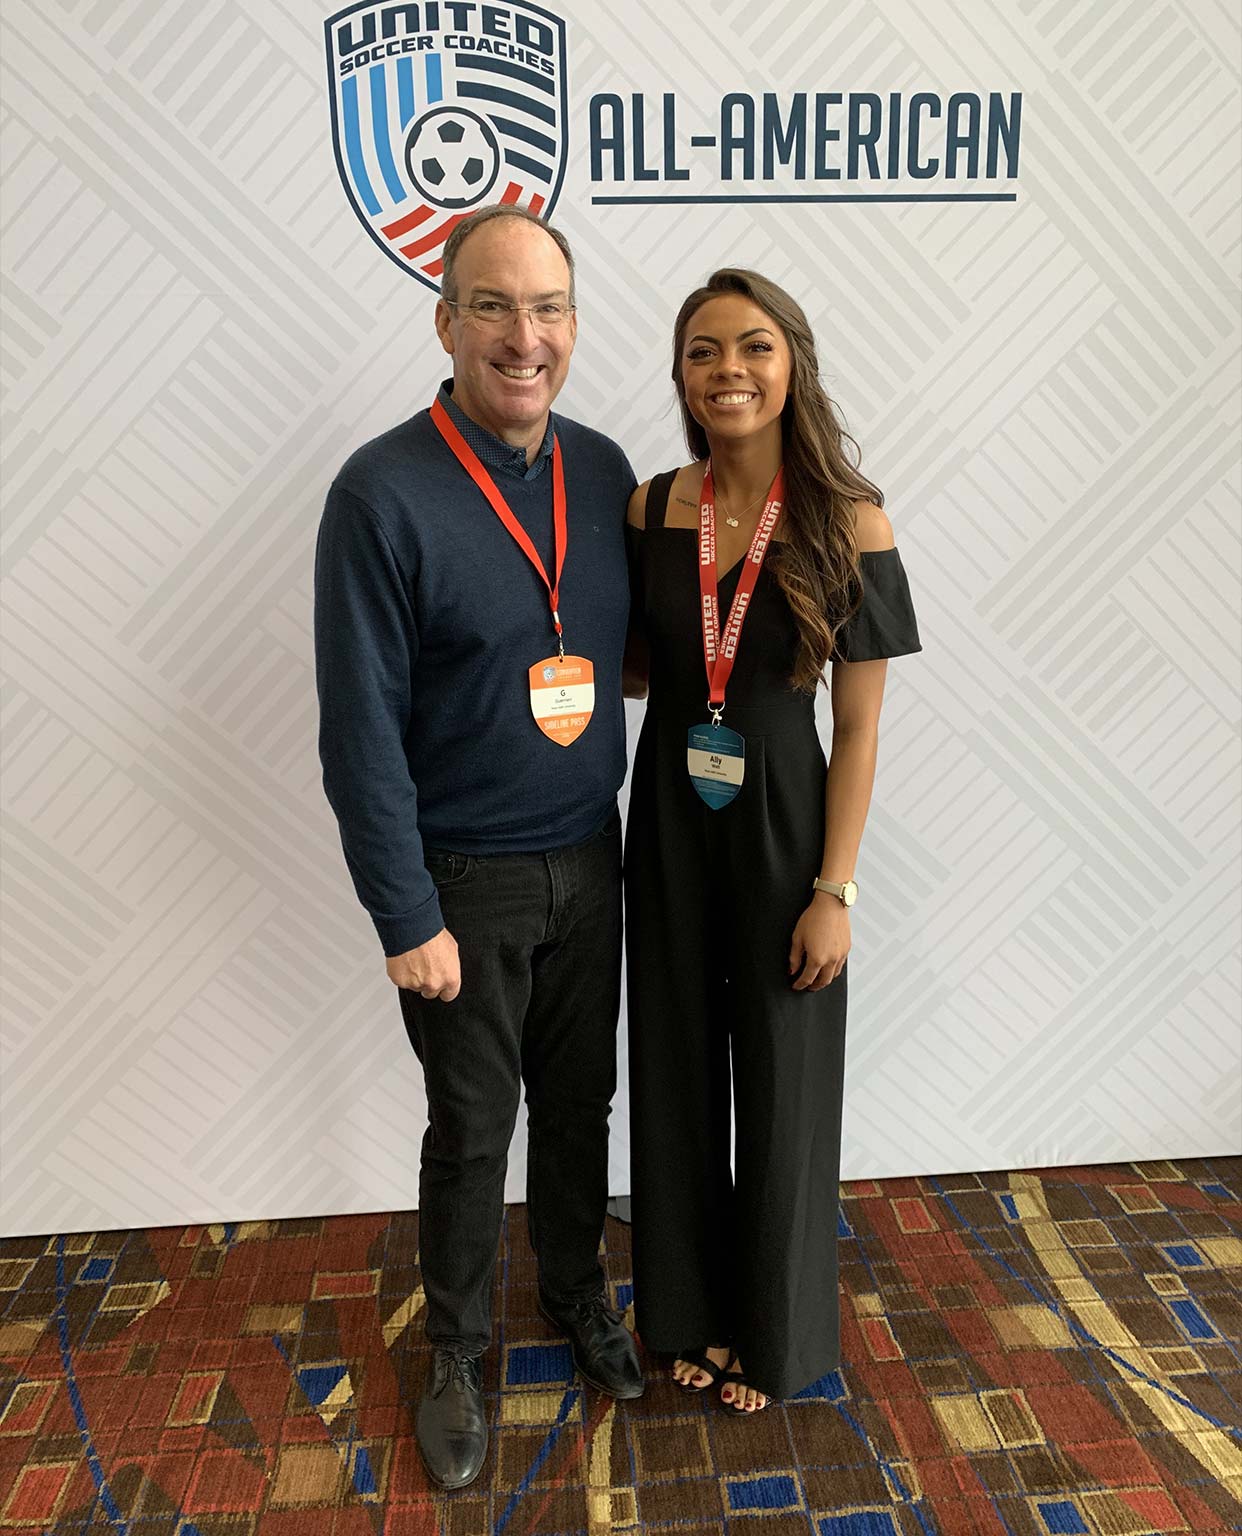 Ally Watt and a gentleman posing in front of a All-American sign